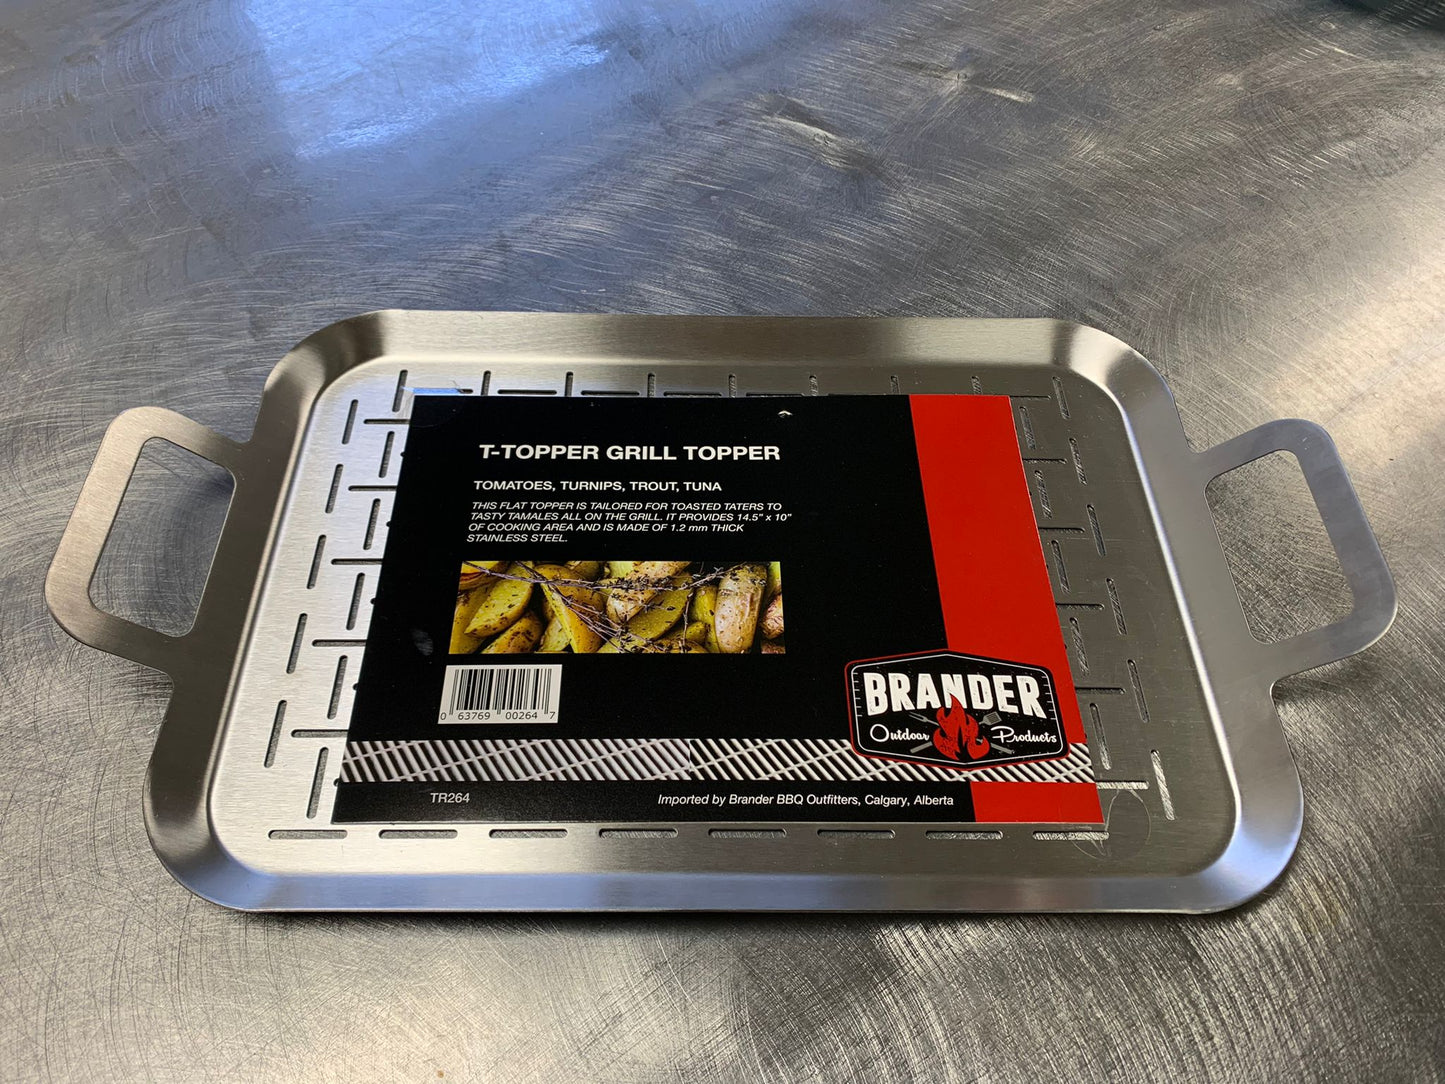 Brander T-Topper Grill Topper - Stainless Steel Grill Pan